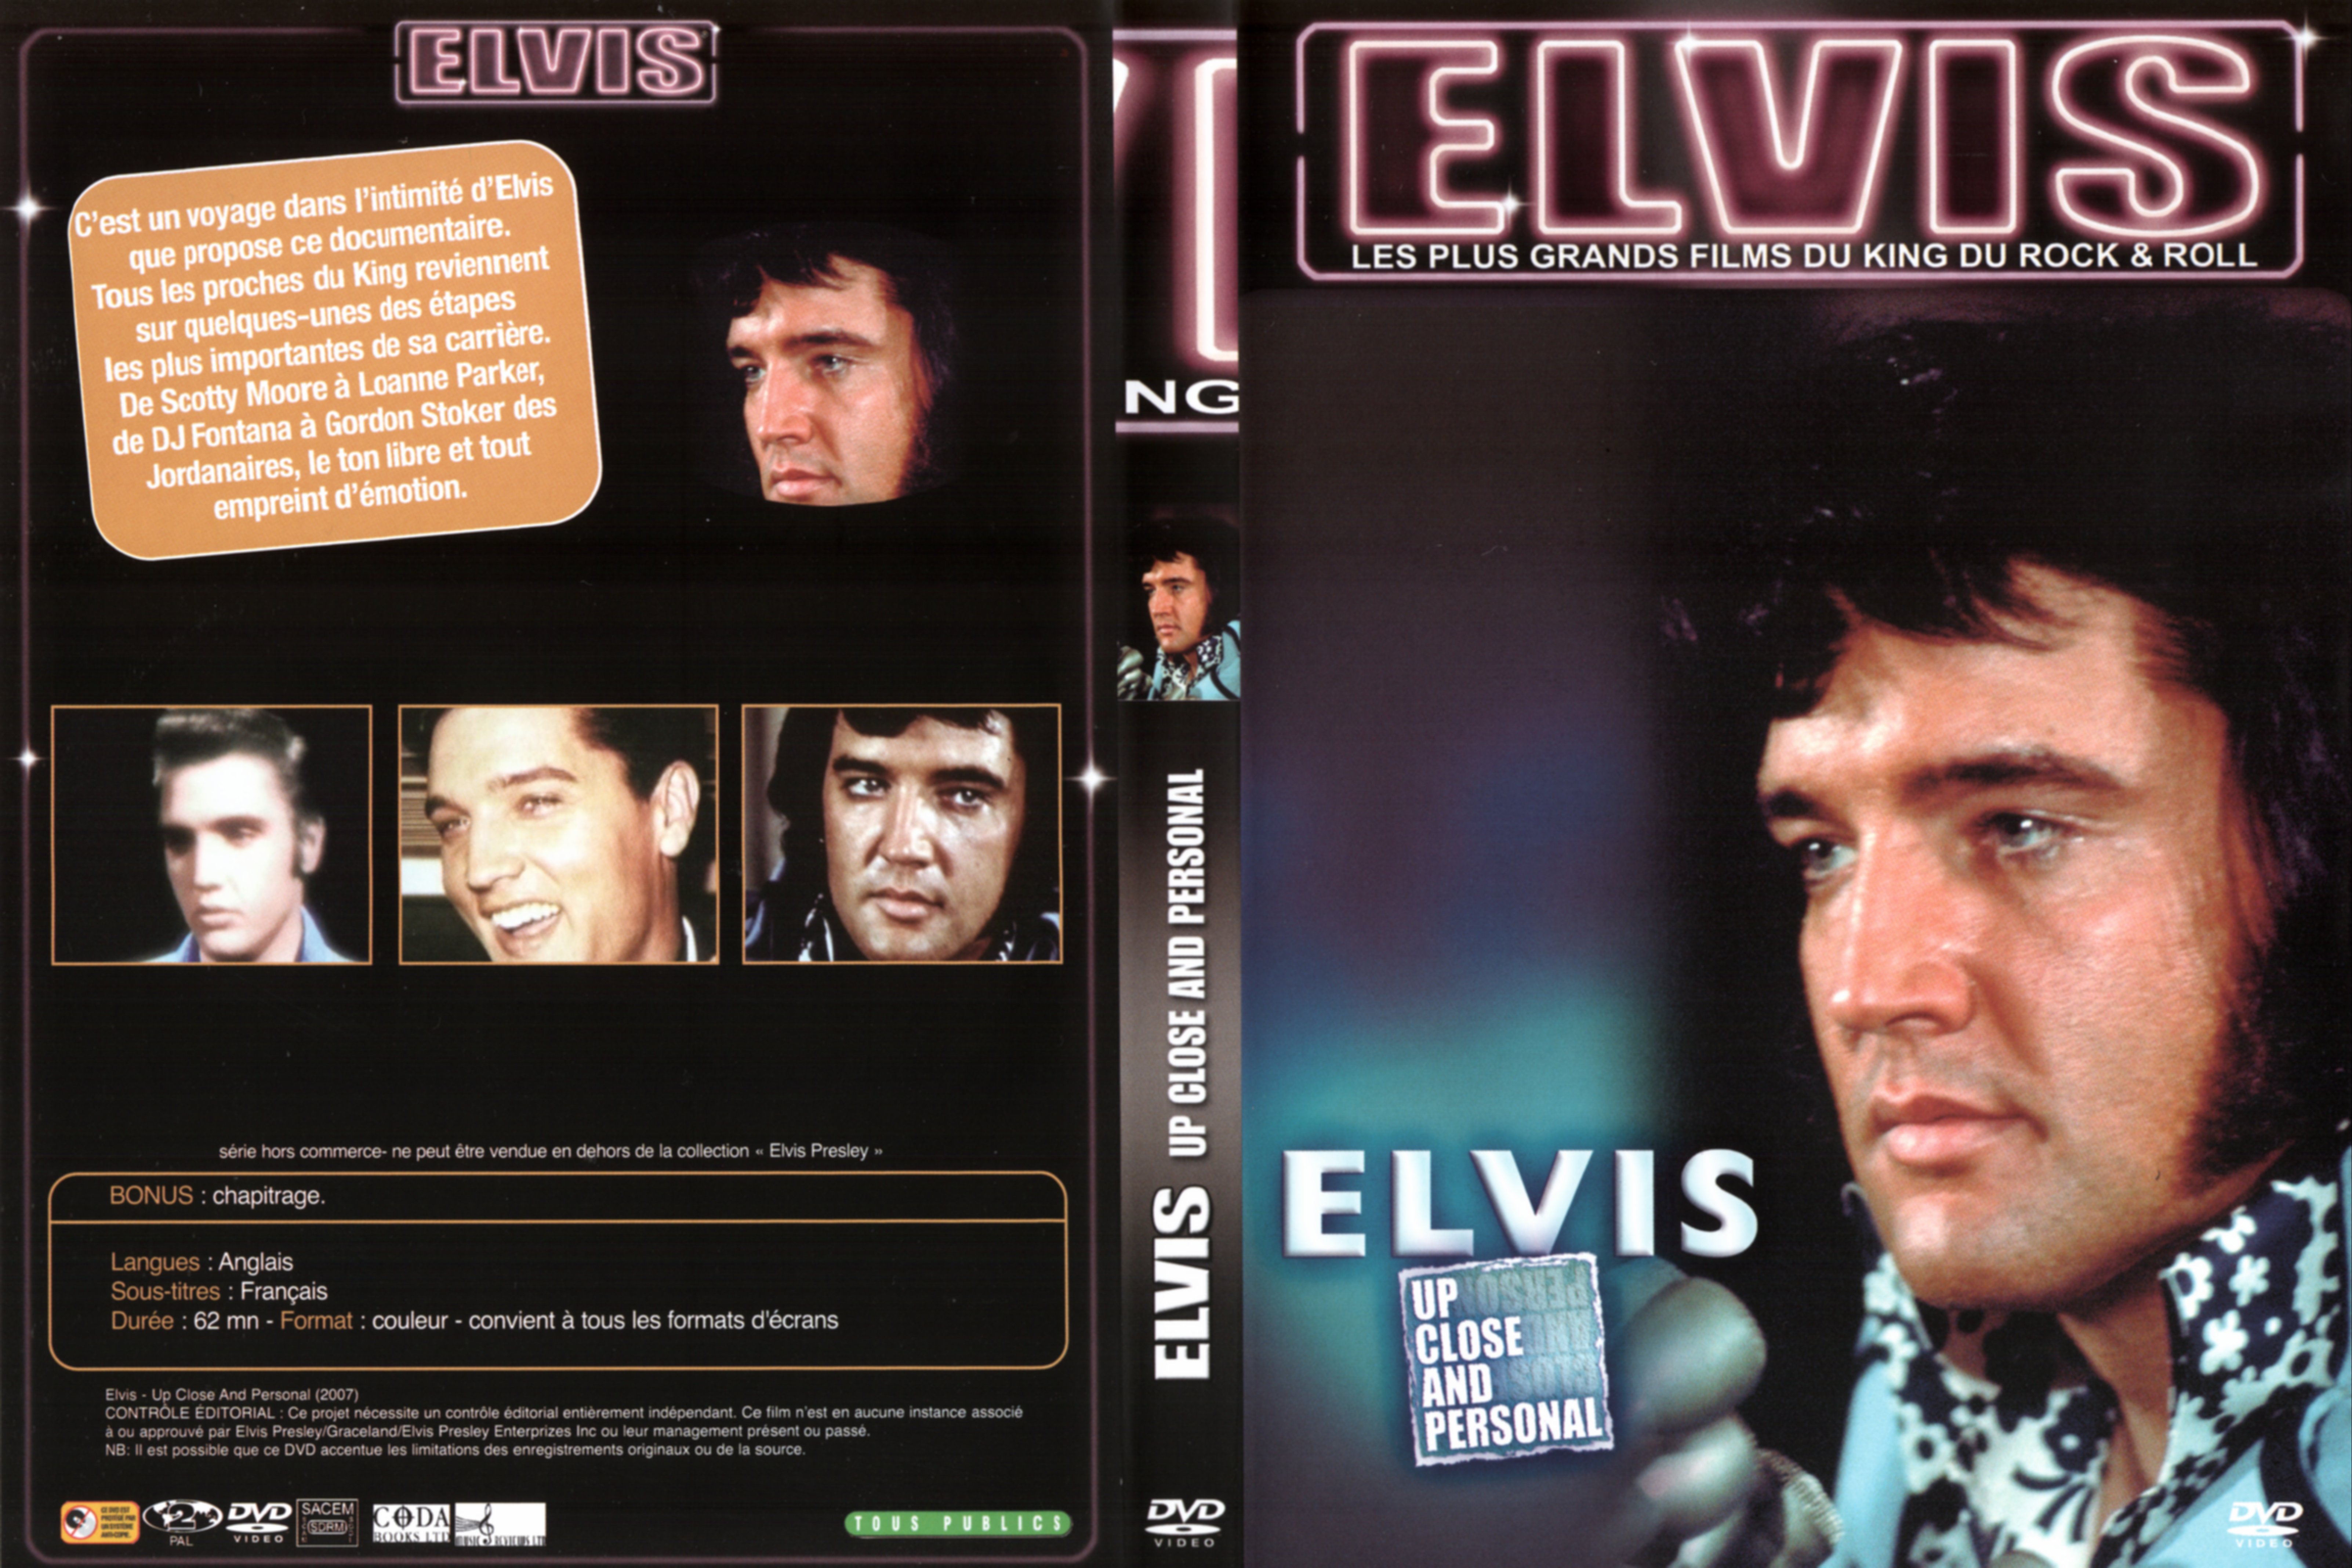 Jaquette DVD Elvis - Up close and personal